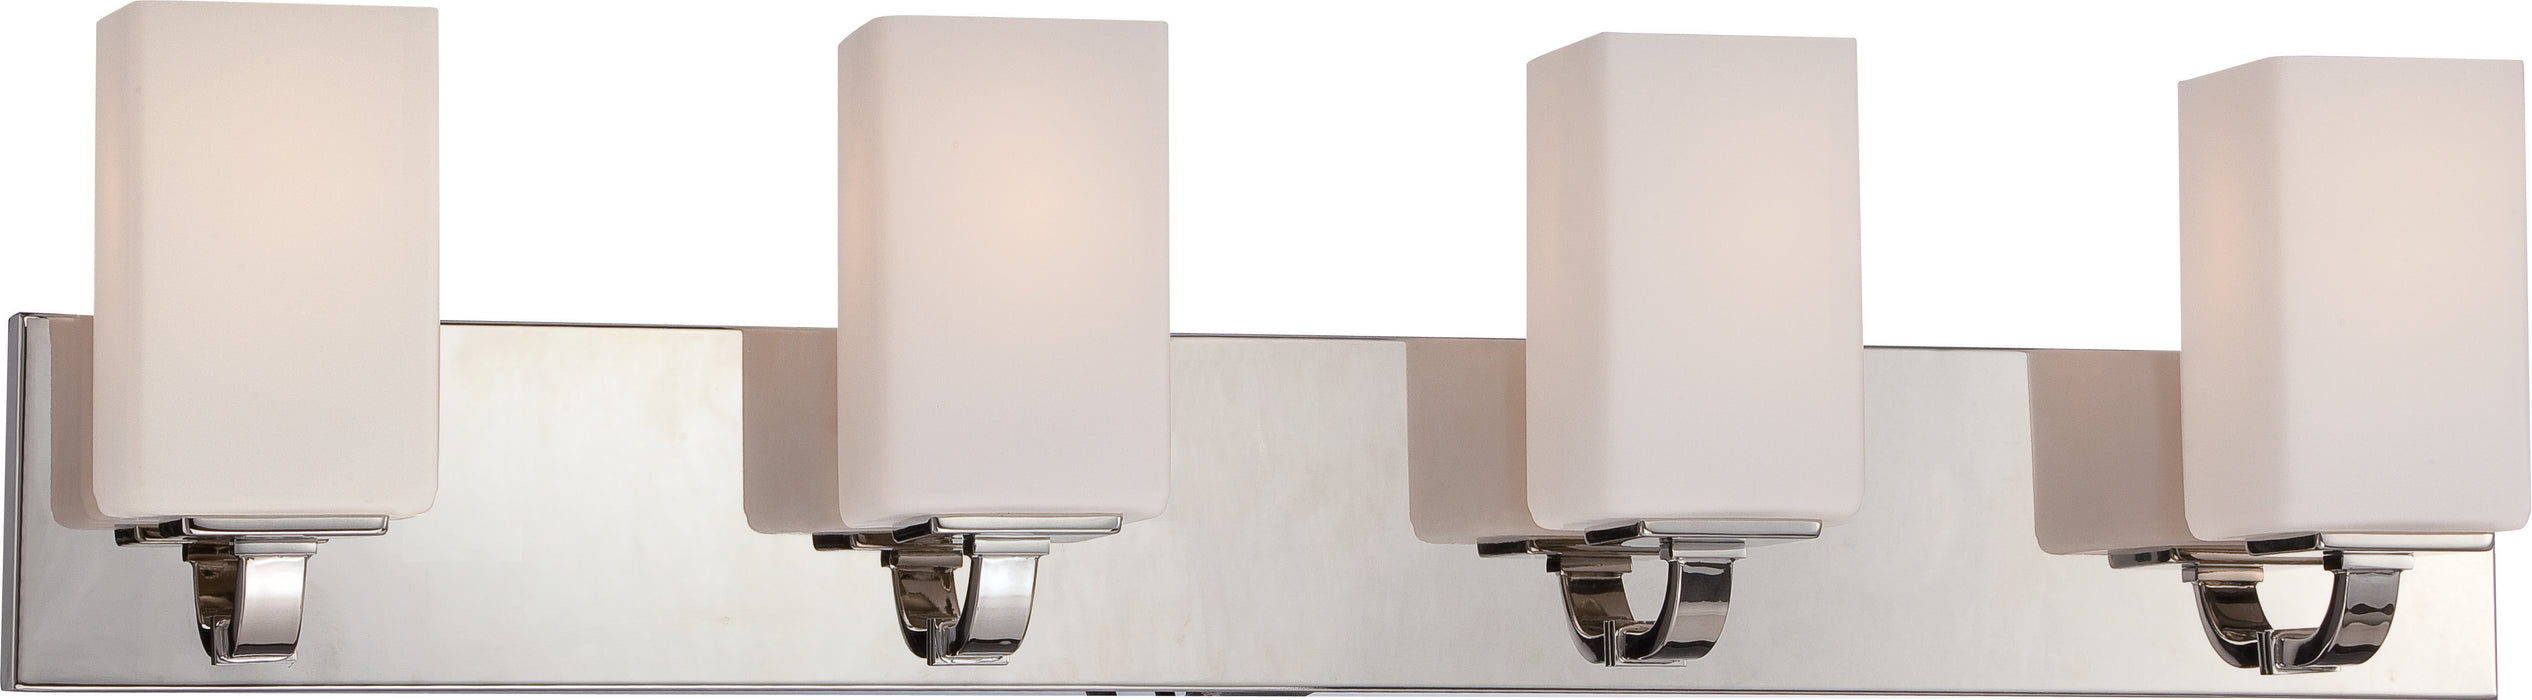 SATCO/NUVO Vista 4-Light Vanity Fixture With Etched Opal Glass (60-5184)